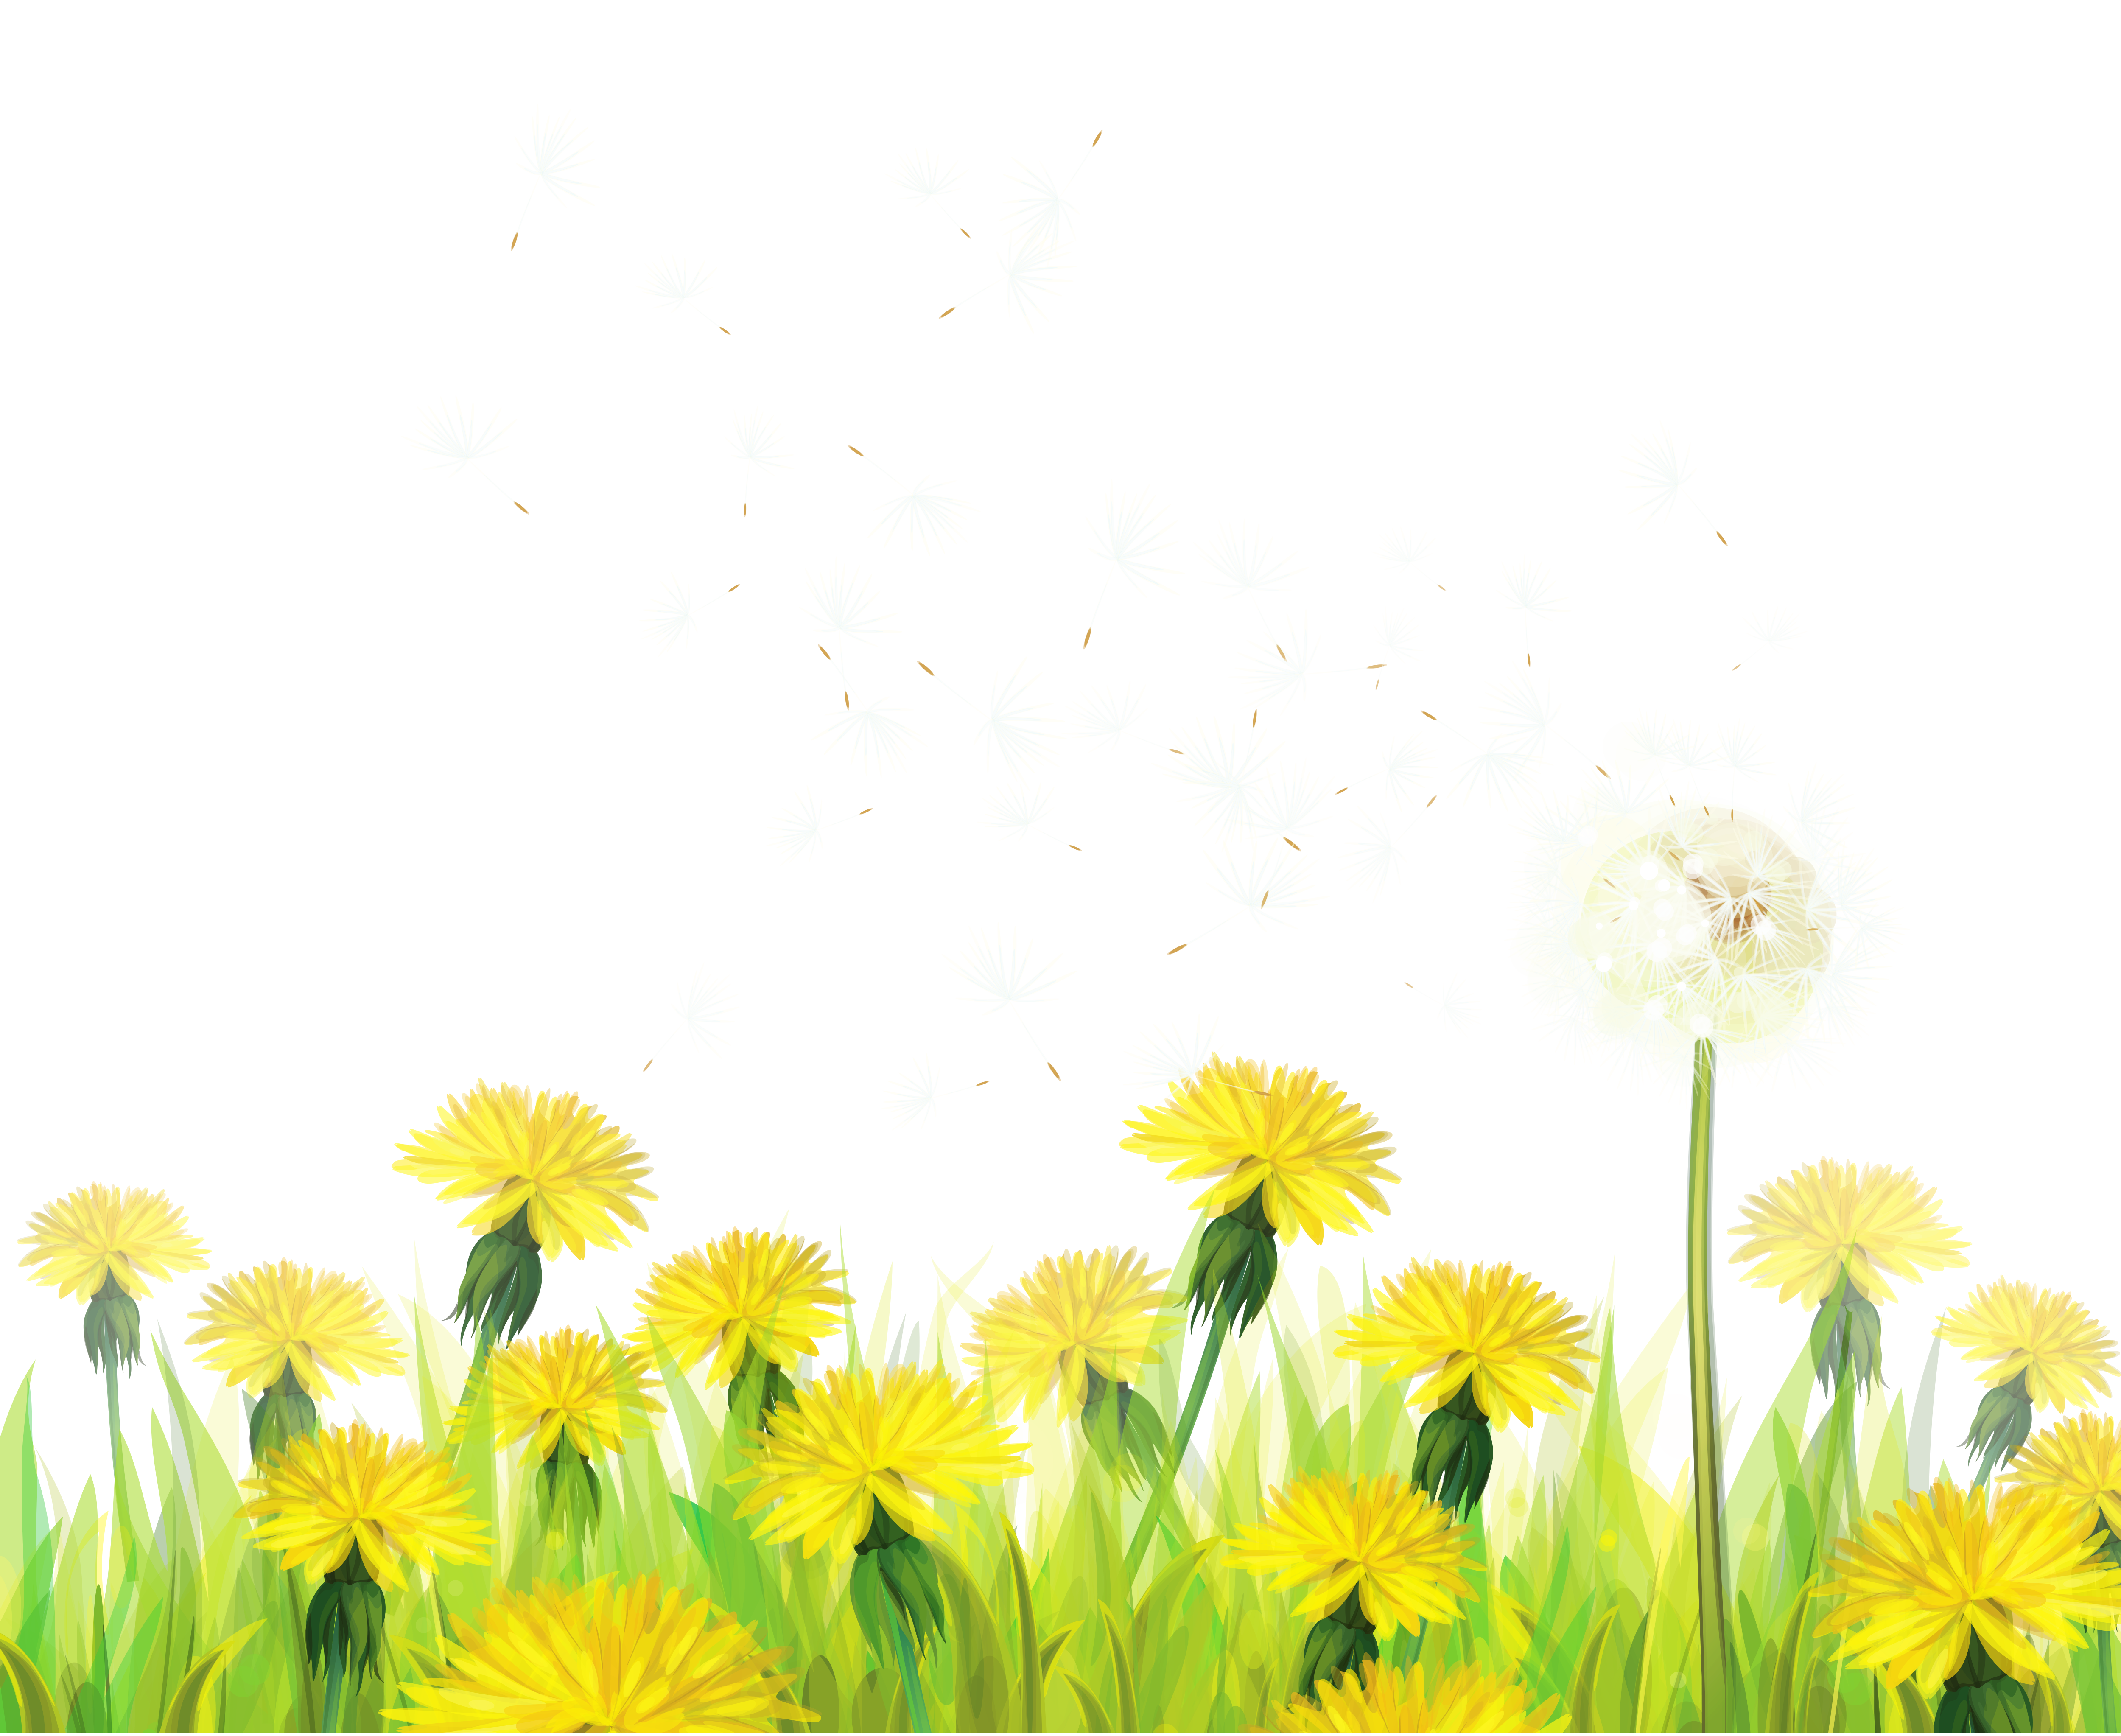 Transparent_Grass_with_Dandelions_Clipart.png?m=1399672800 